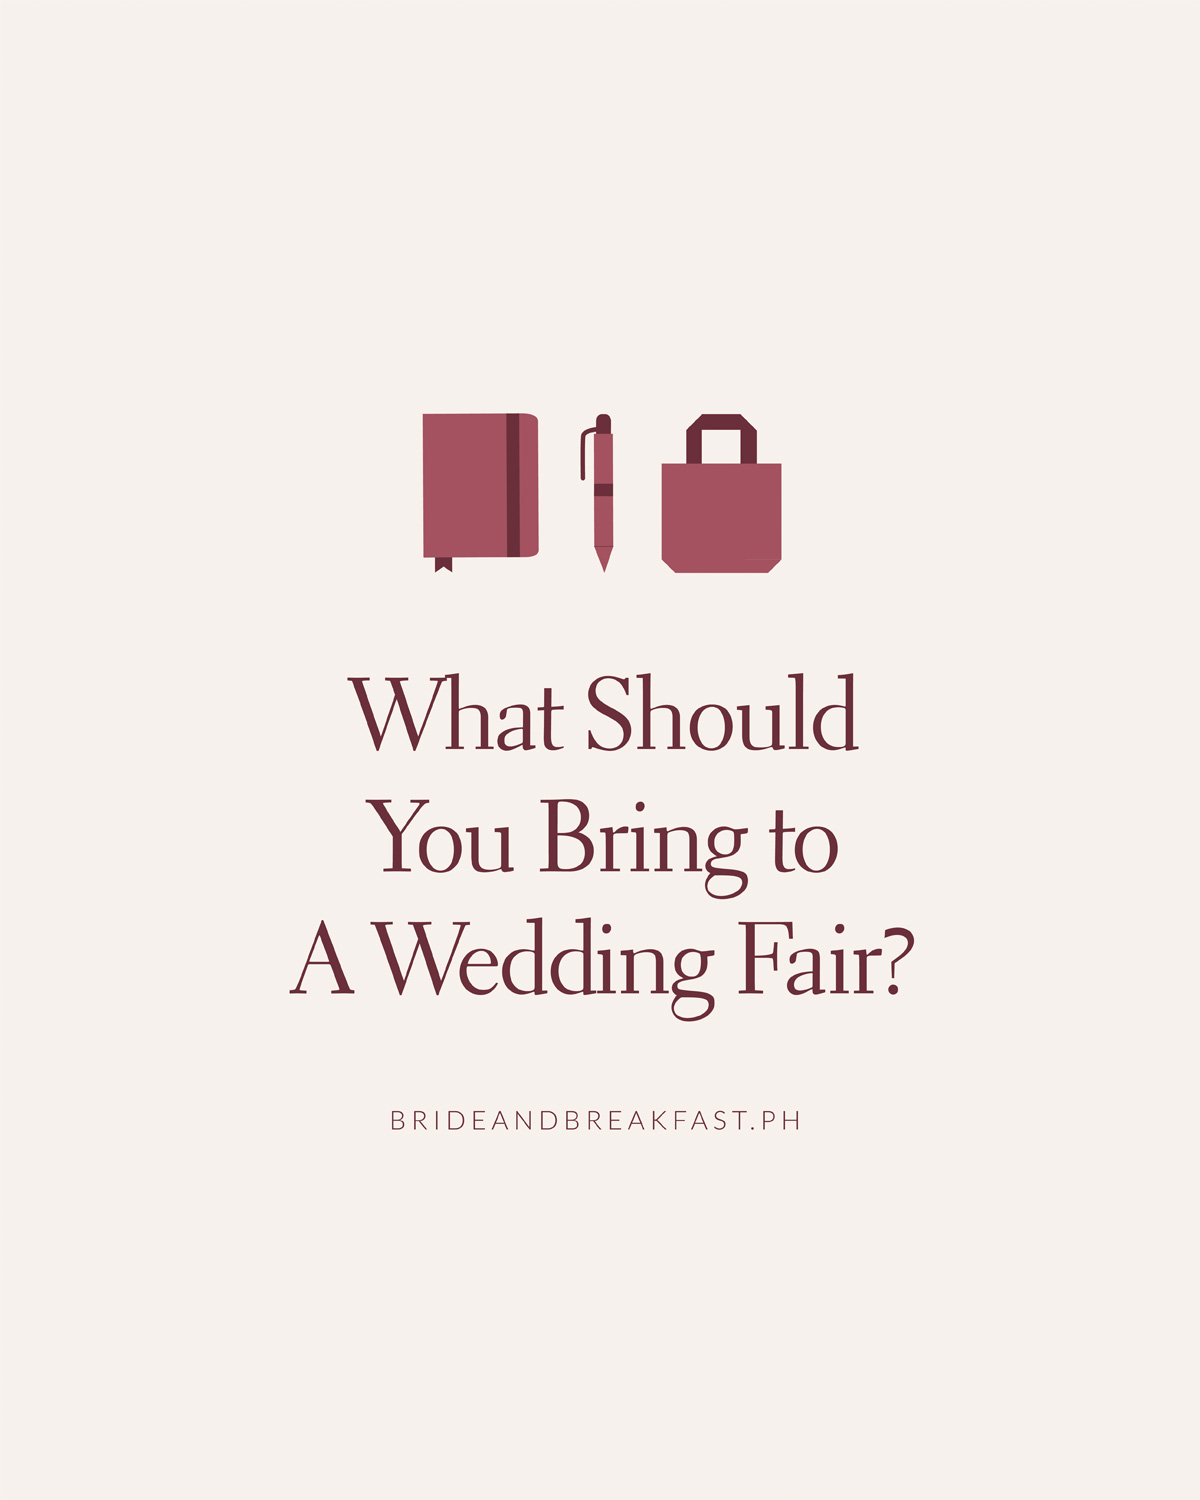 What Should You Bring to A Wedding Fair?